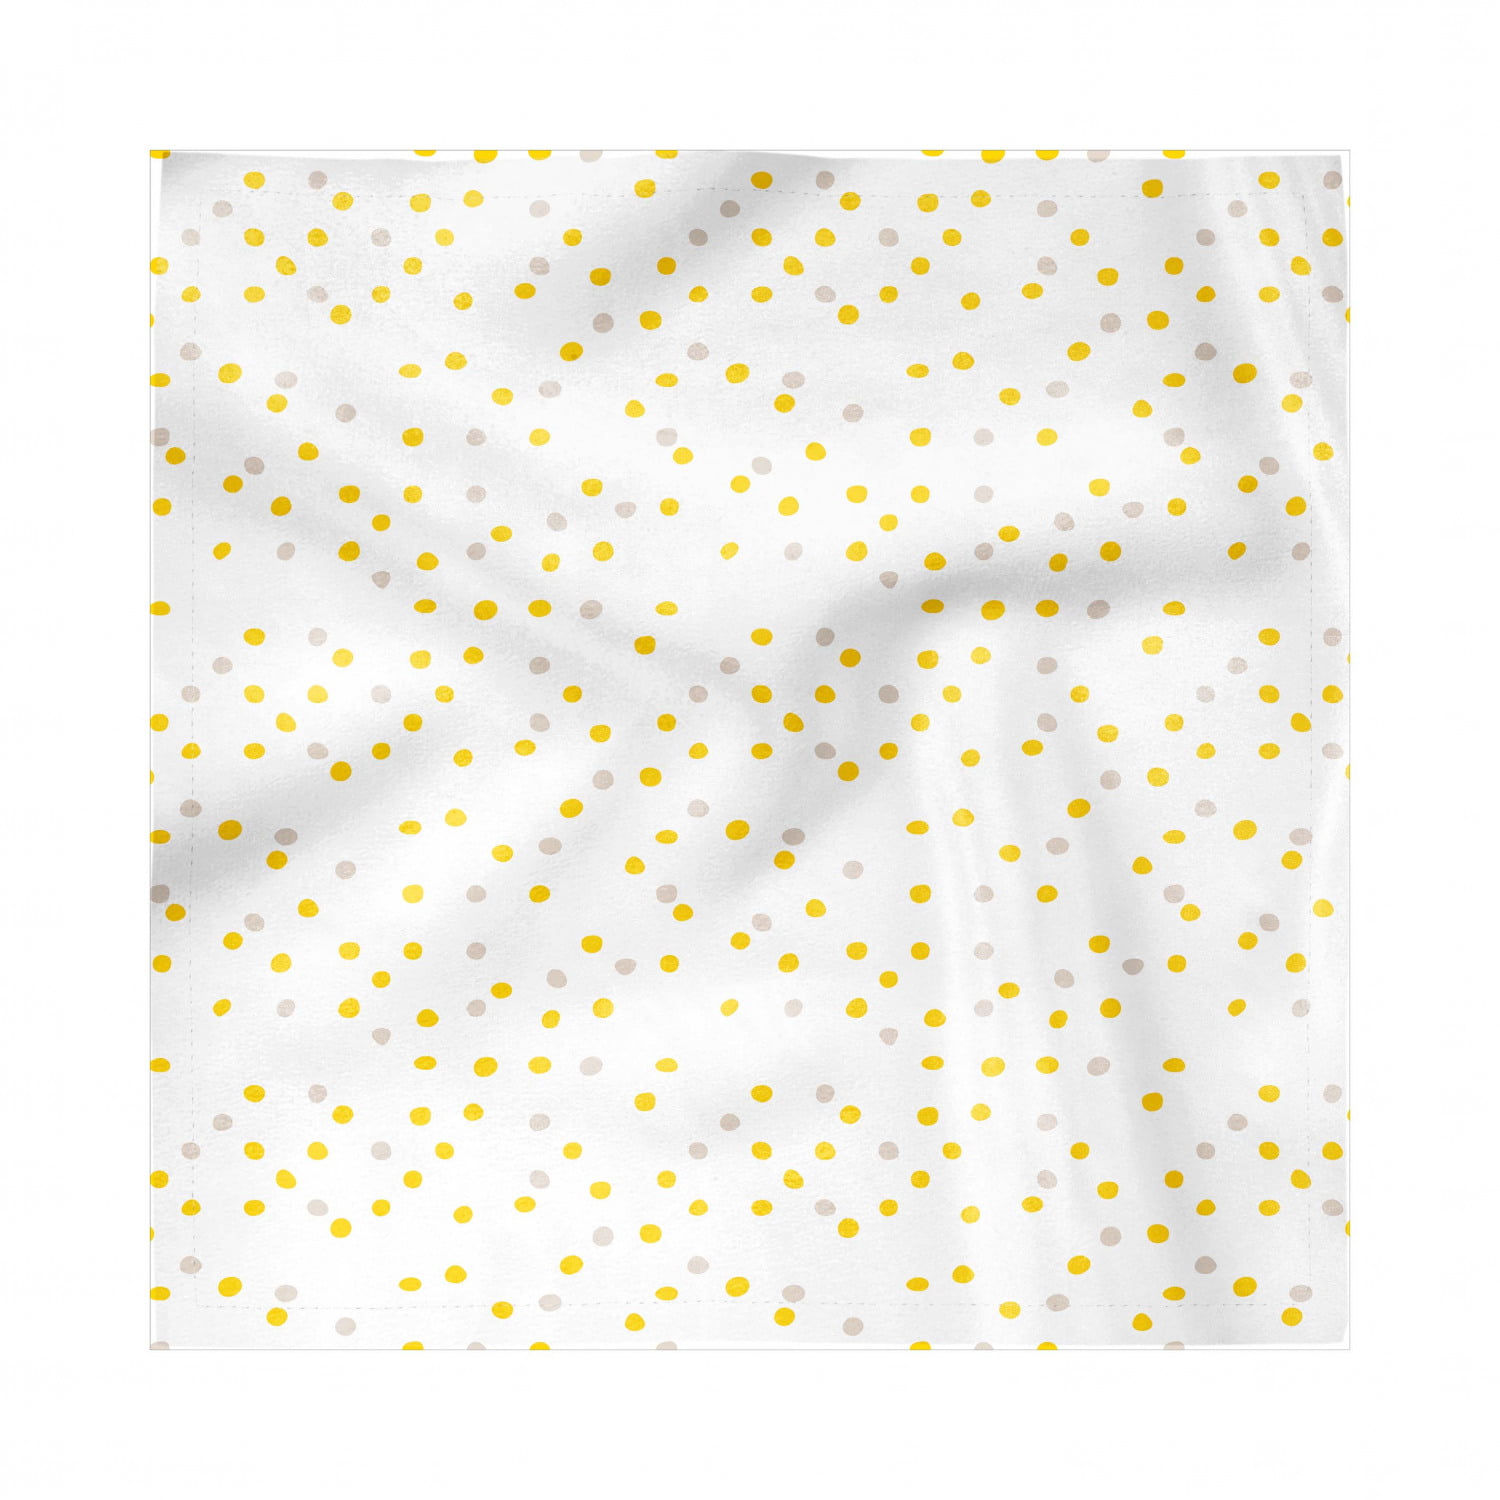 YELLOW Colour Spot Polka Dot Disposable TABLEWARE Events Catering Birthday Party 